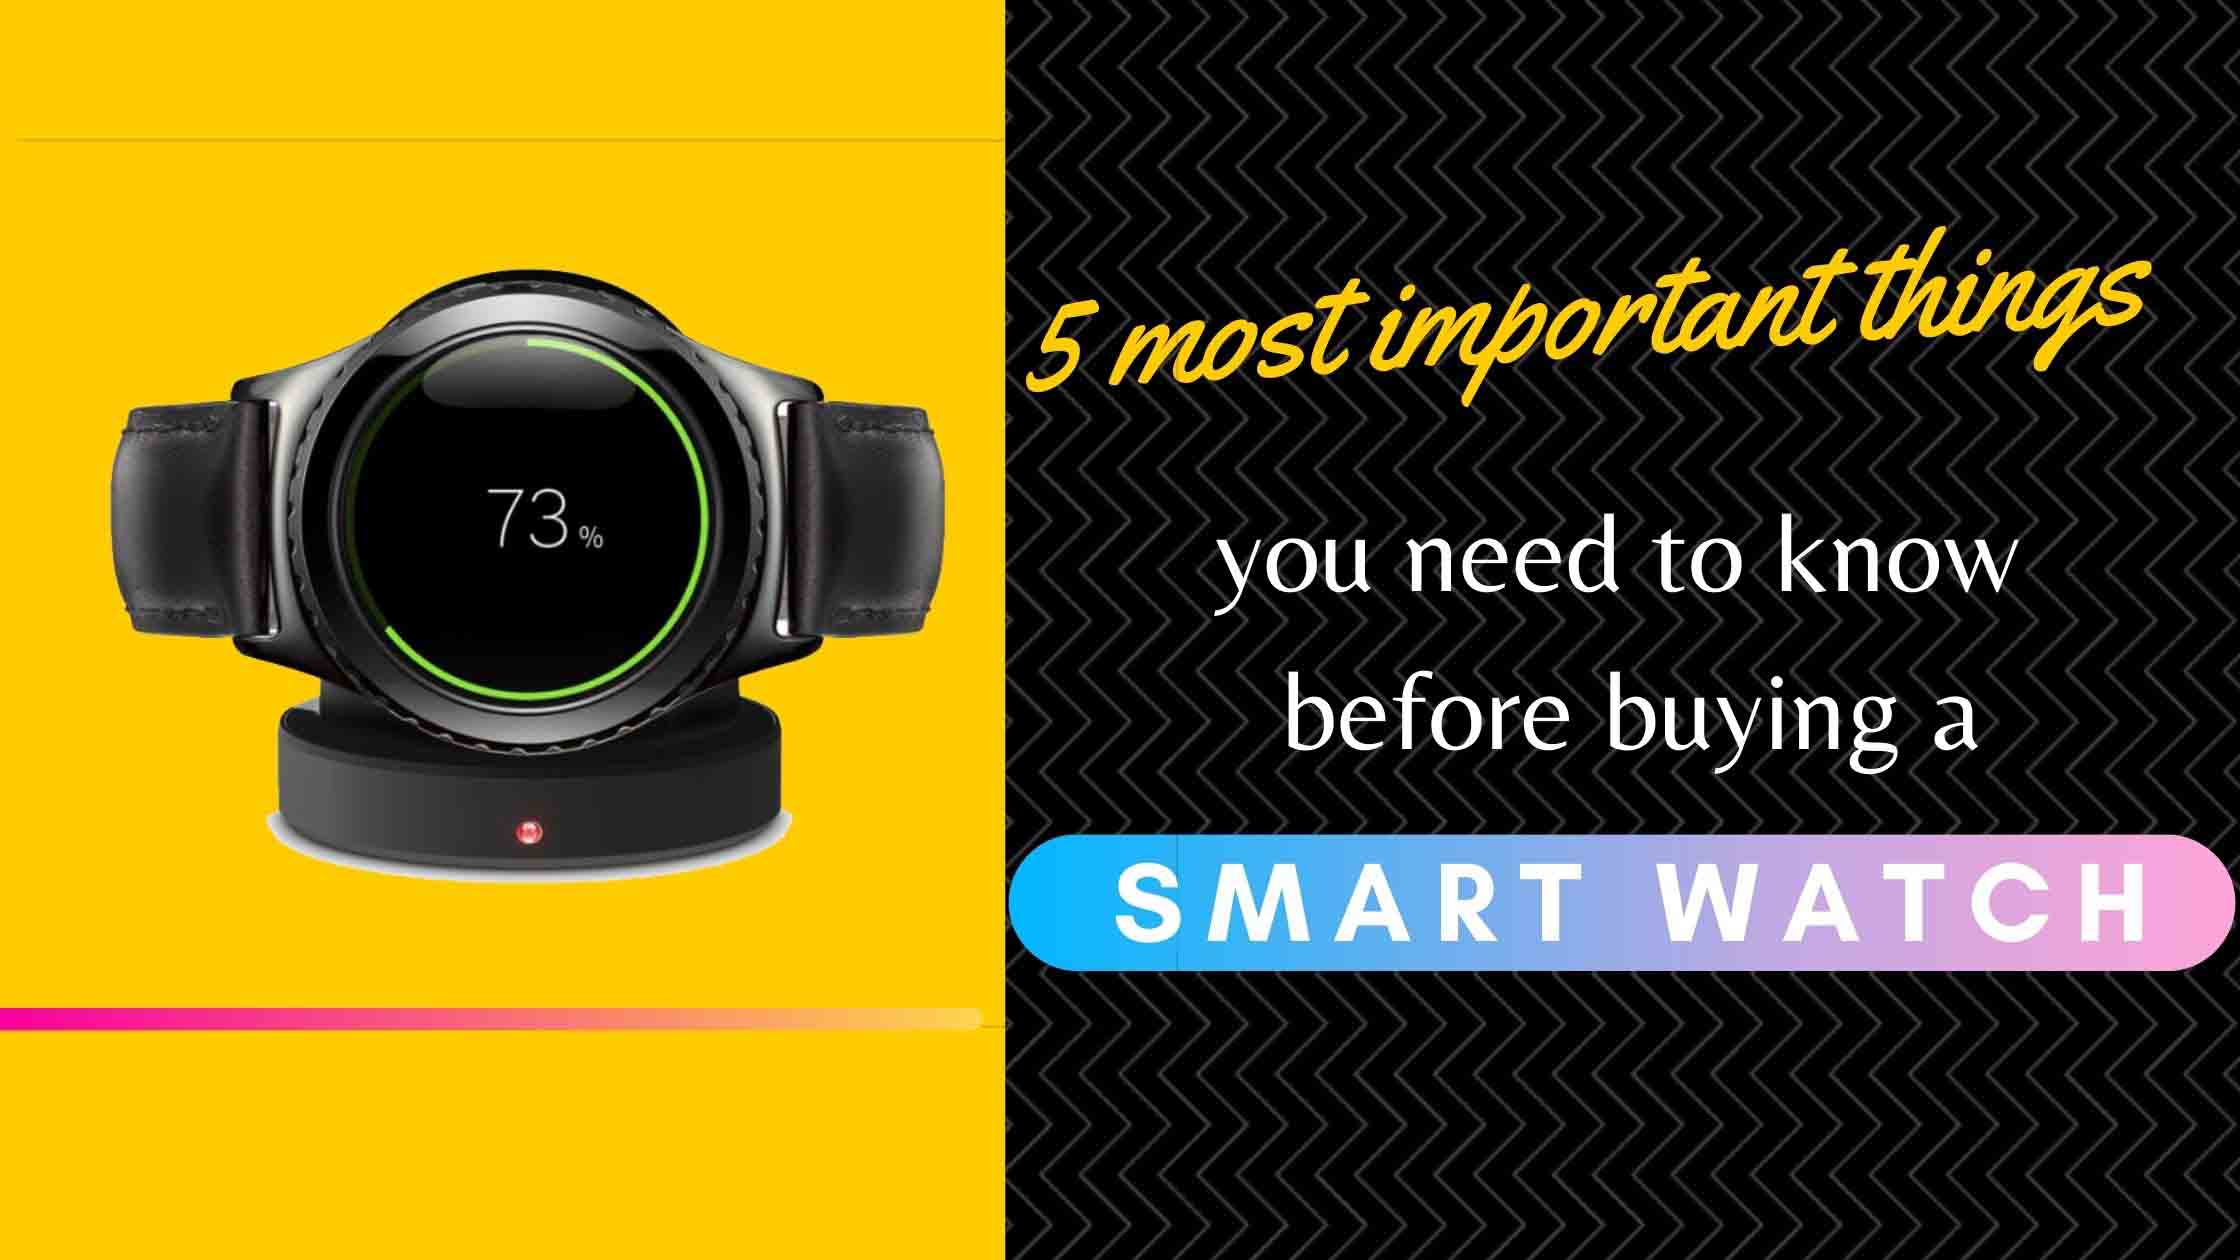 7 Benefits Of Costco Smart Watch That May Change Your Perspective. 2022 Â» AONEgadgets